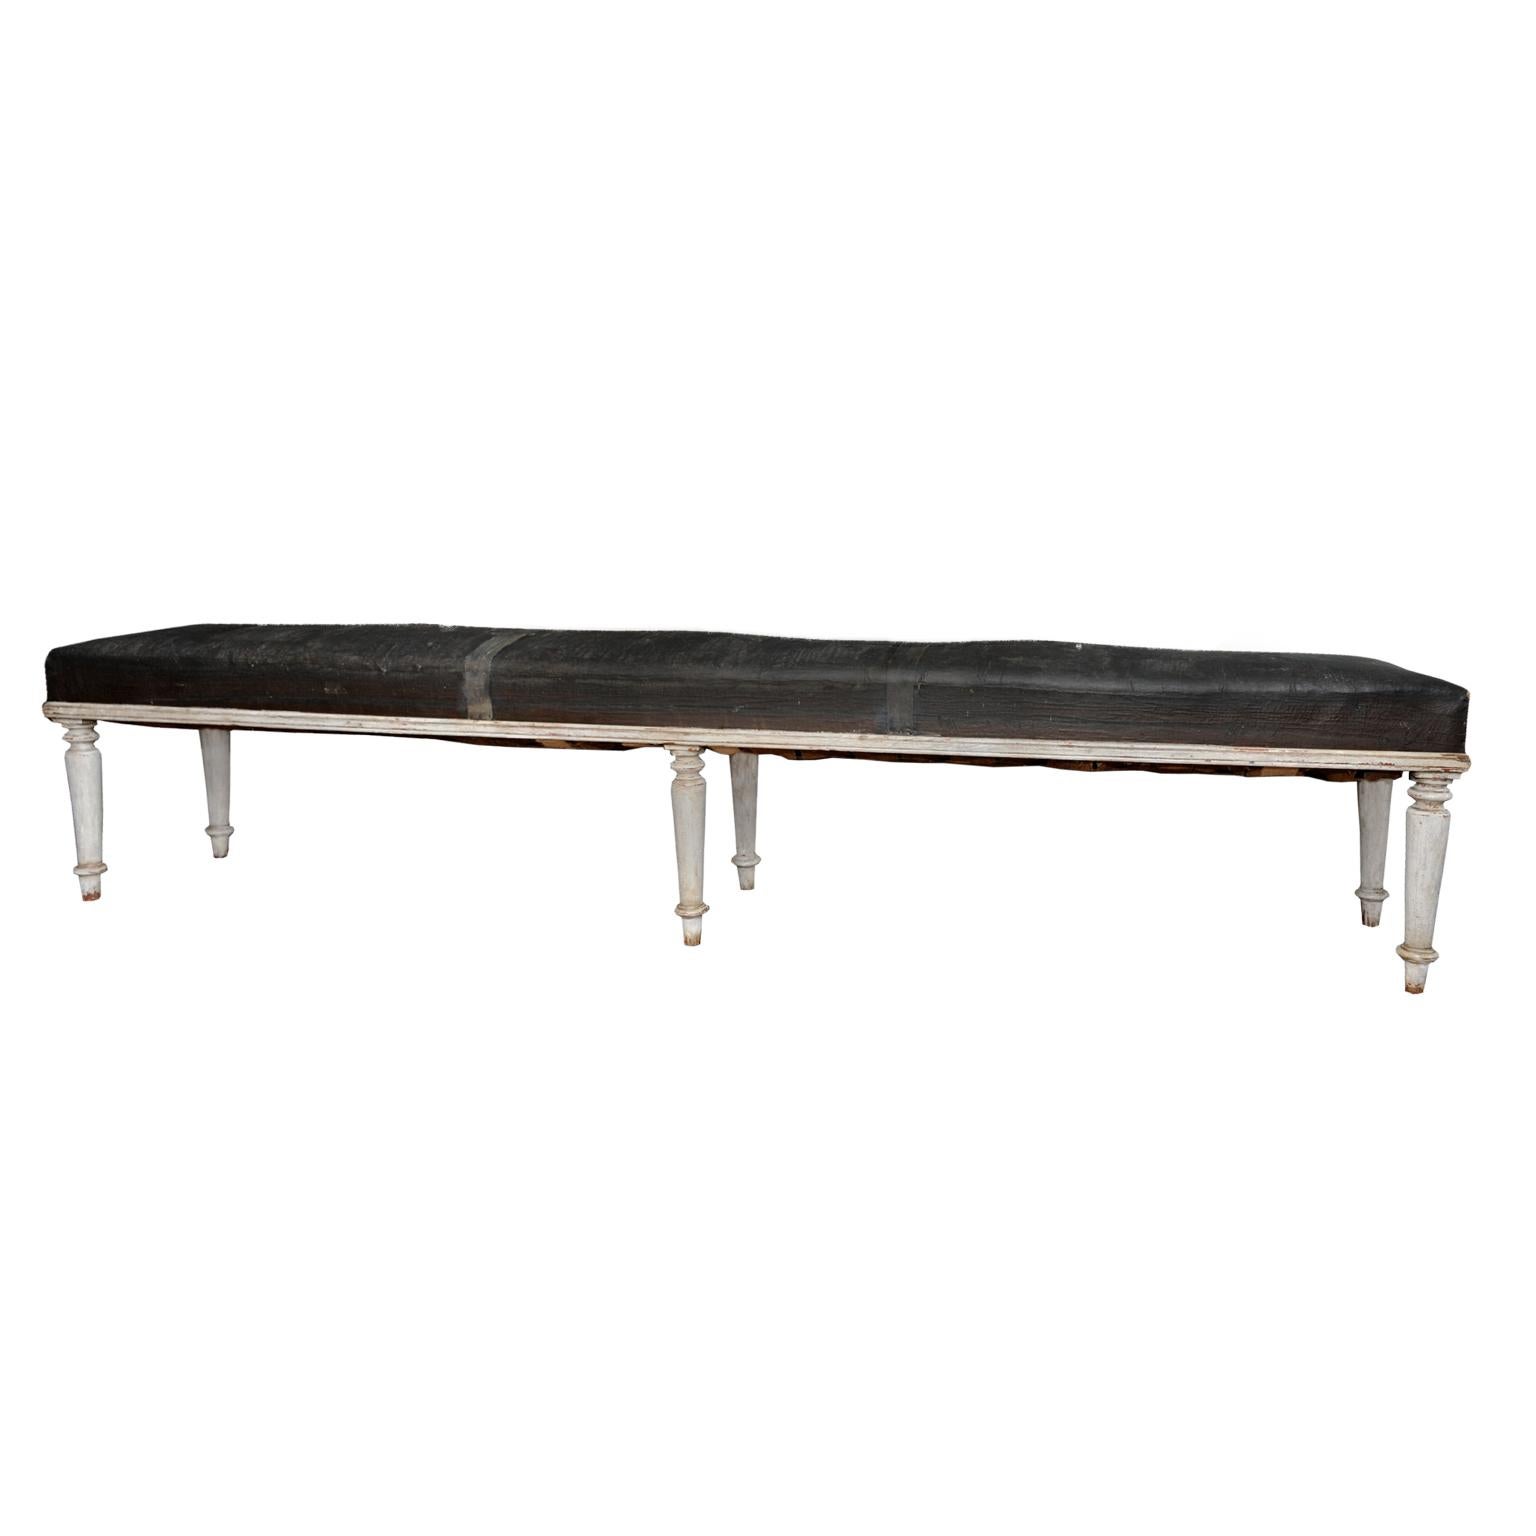 This is a very attractive and unusually long (8ft/245cm) English George IV painted hall or gallery bench, retaining its original leather cloth covering, circa 1825.